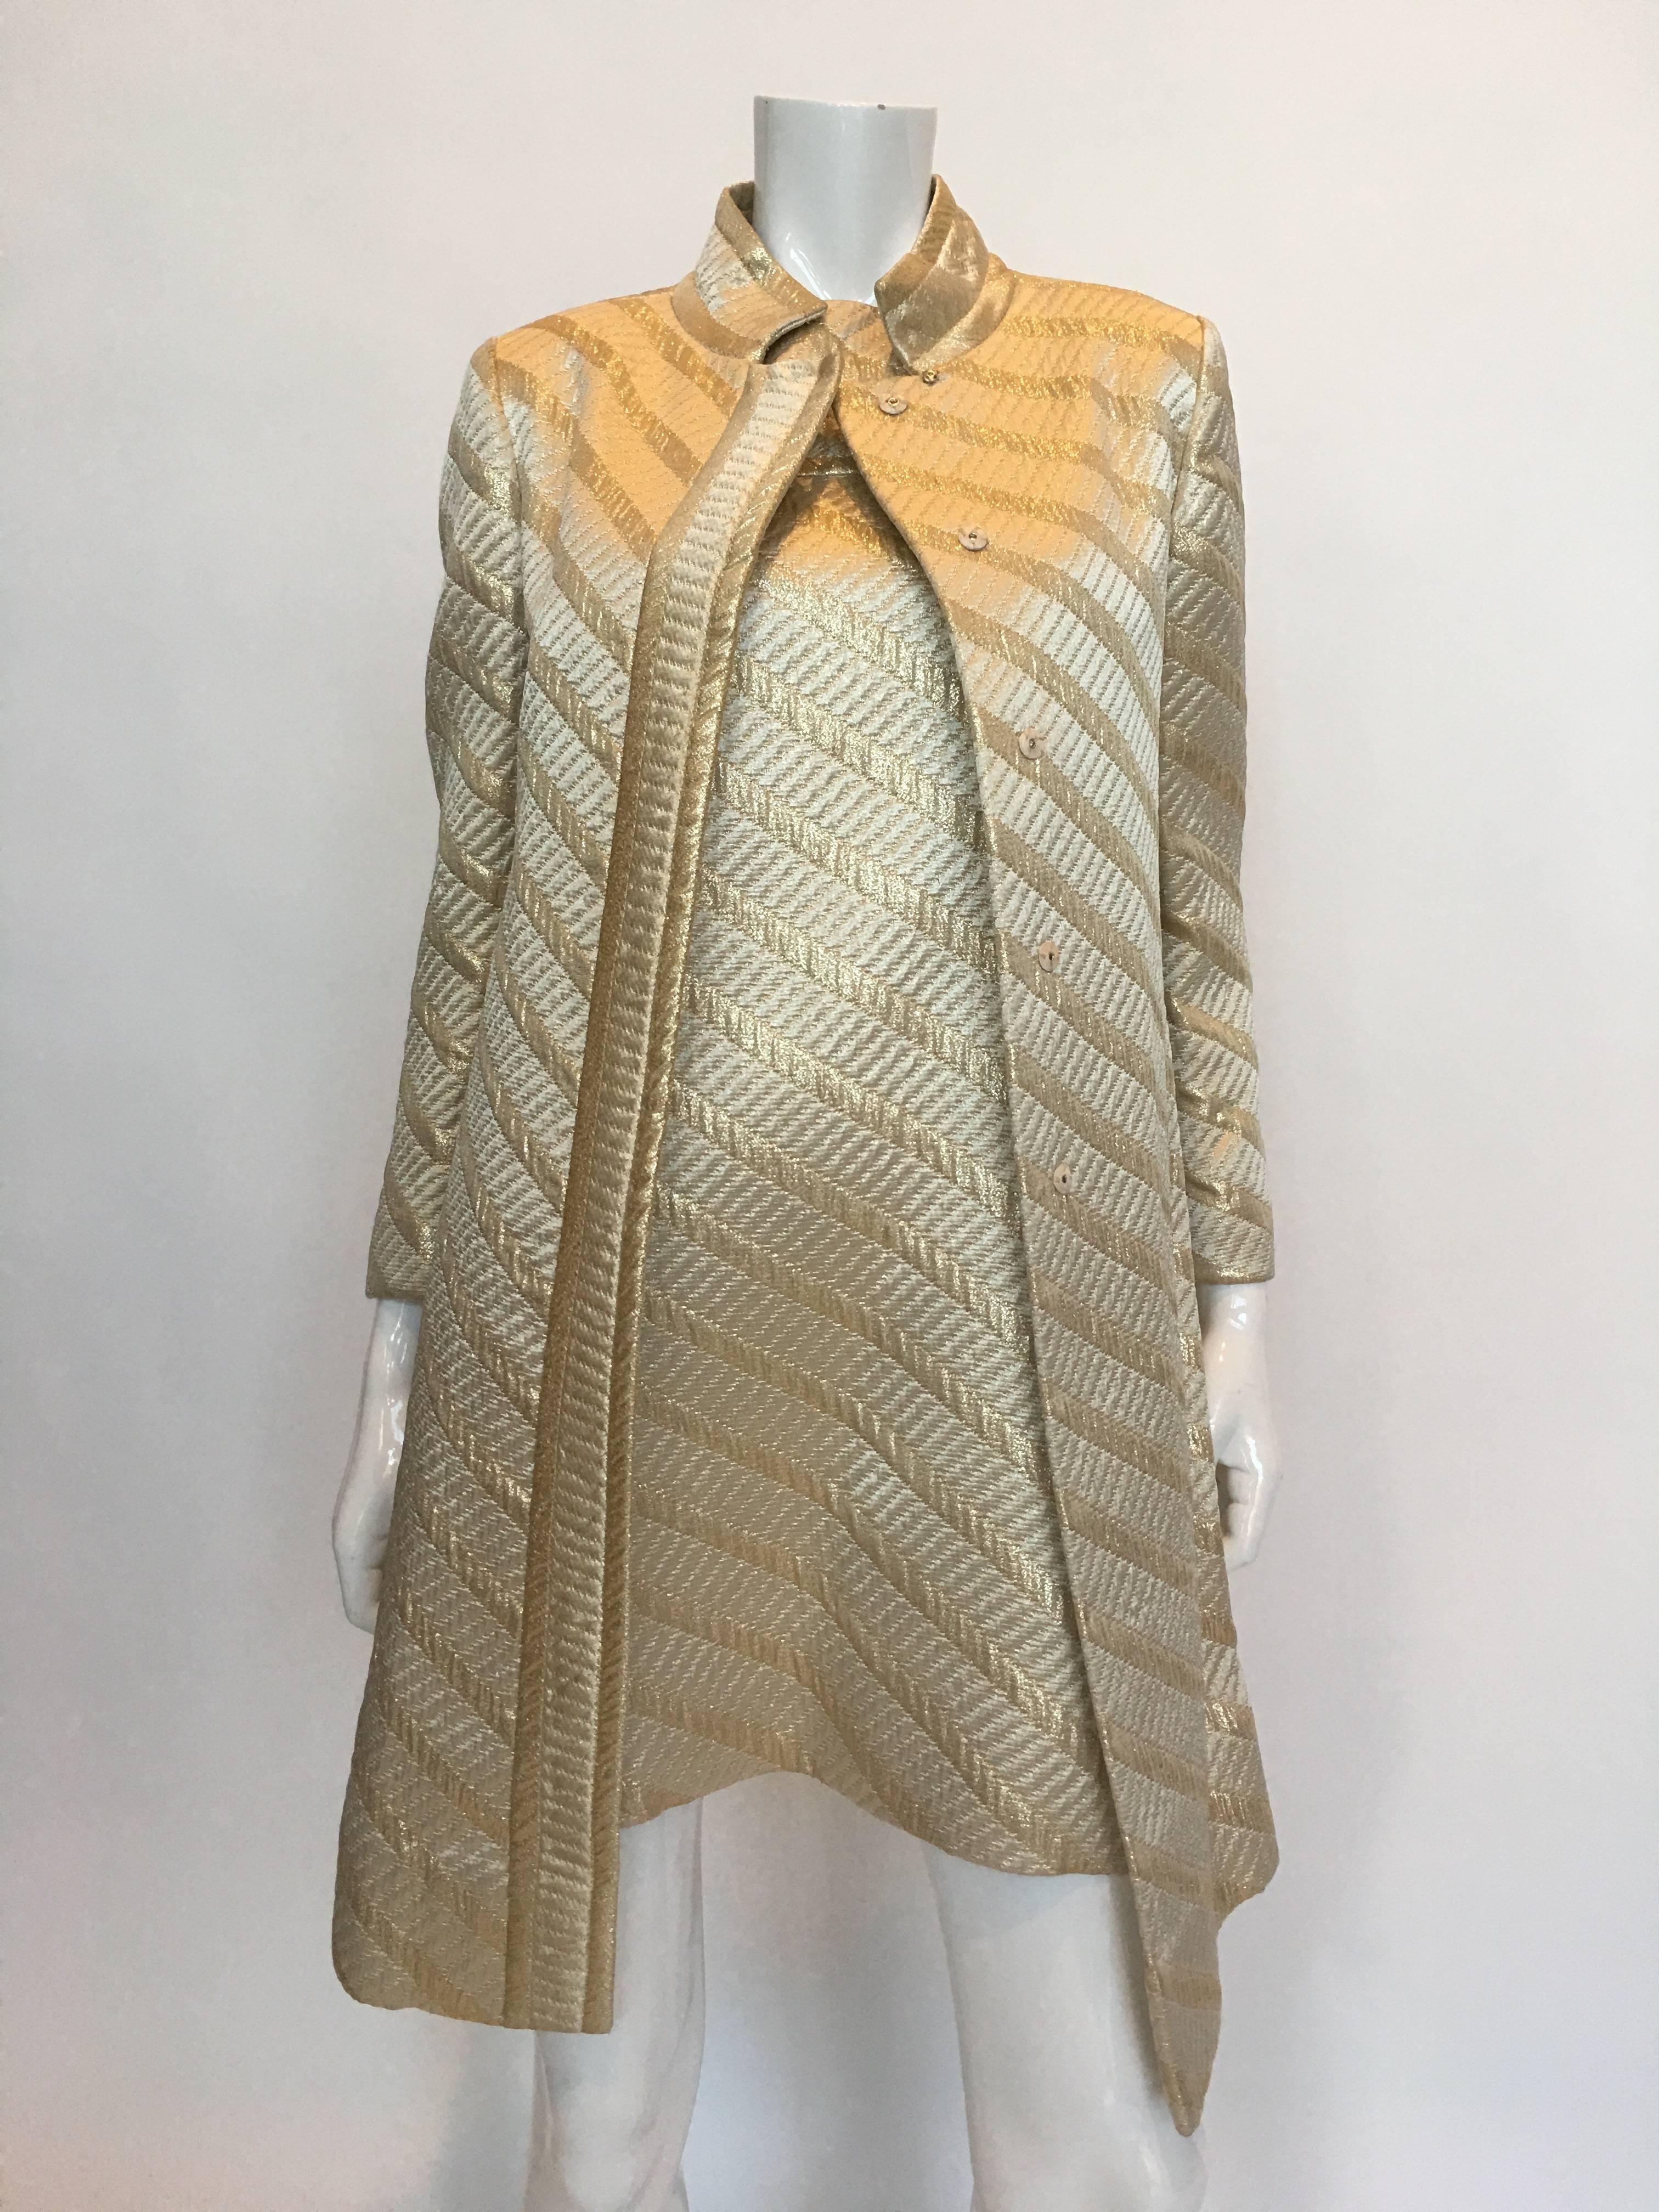 1960s Mod Gold Jackie O Gucci Style Matching Coat and Dress 2 Piece Ensemble 
Made in USA - Union Label 

Size Label Reads :  Coat 9     
                                 Dress 10
According to measurements taken in this listing the size is closer to